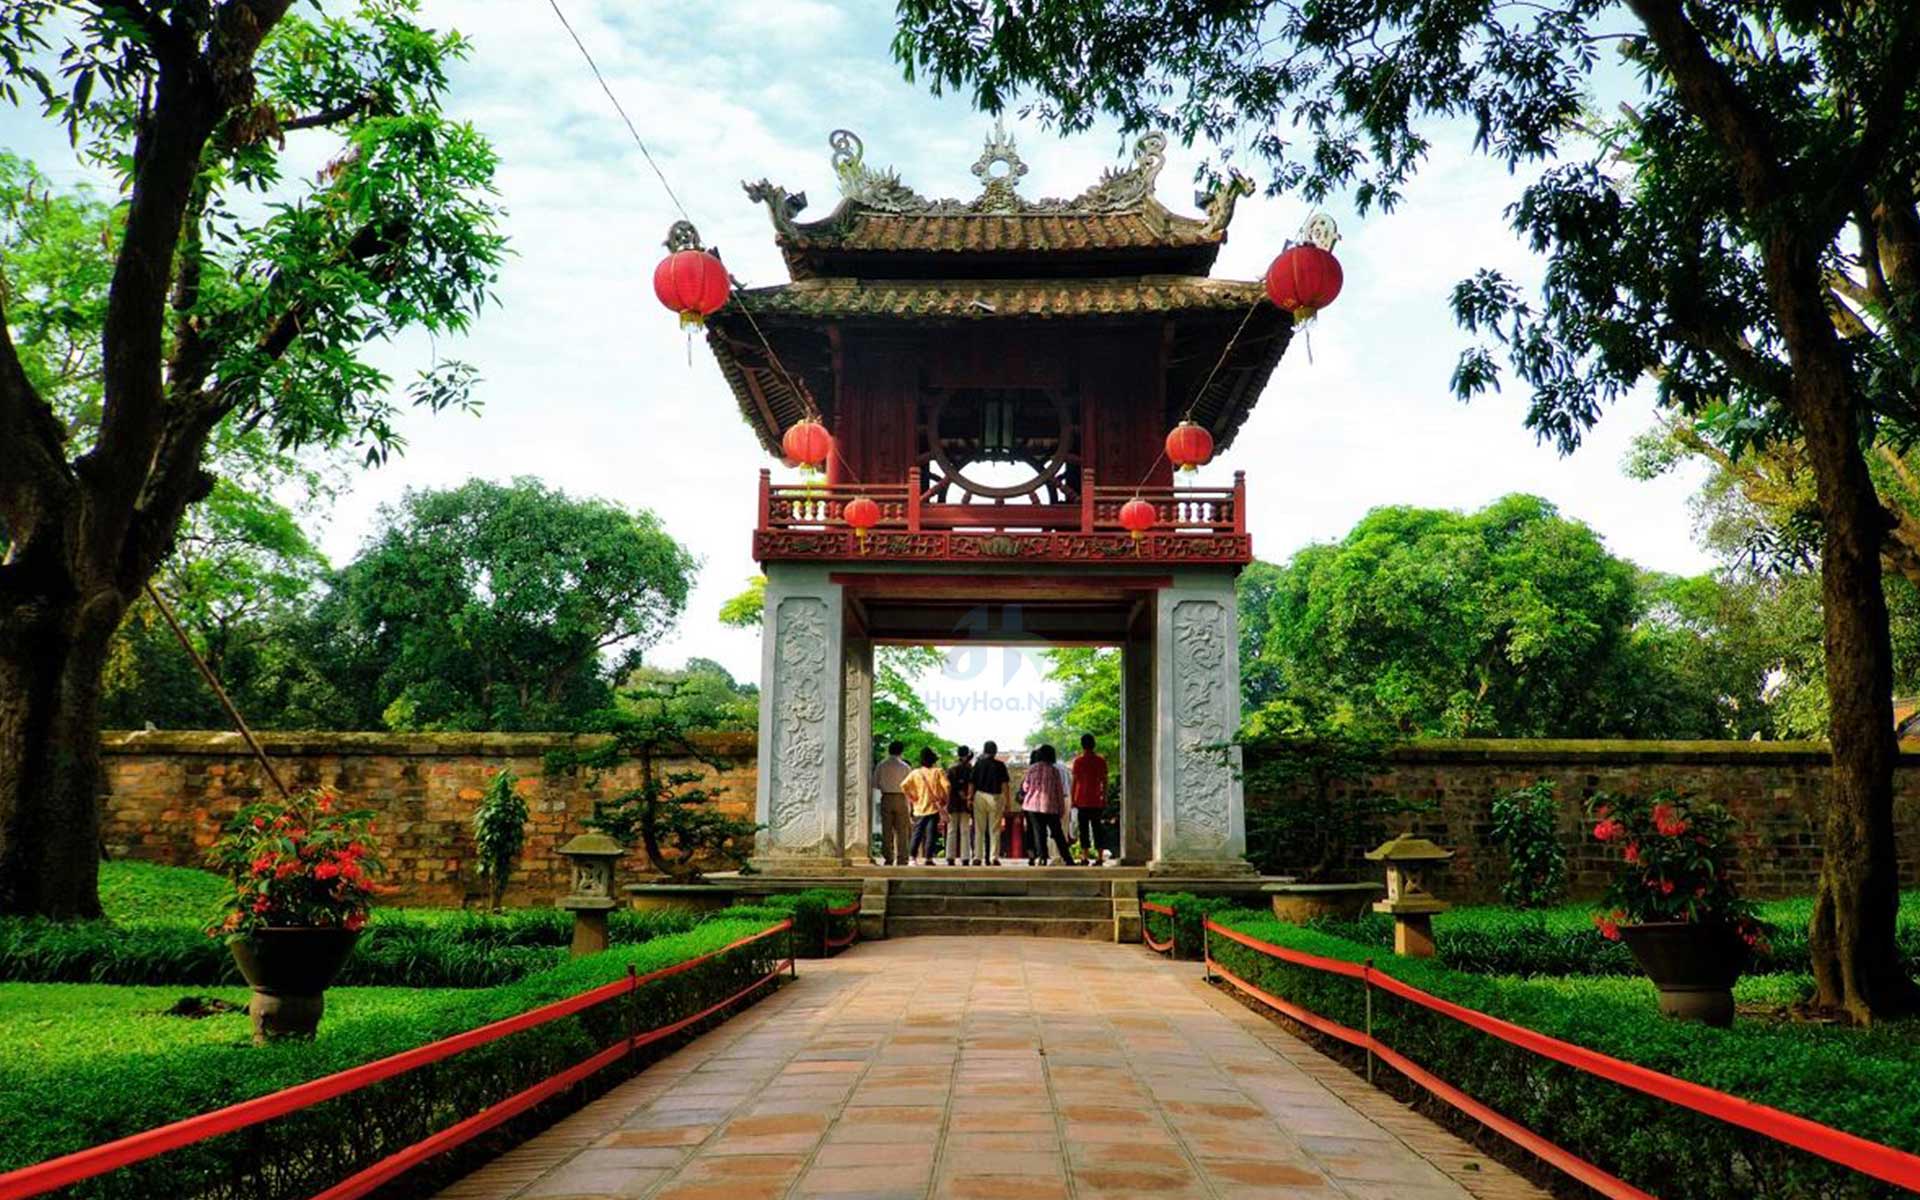 Visit Temple of Literature - one of the best things to do in Hanoi